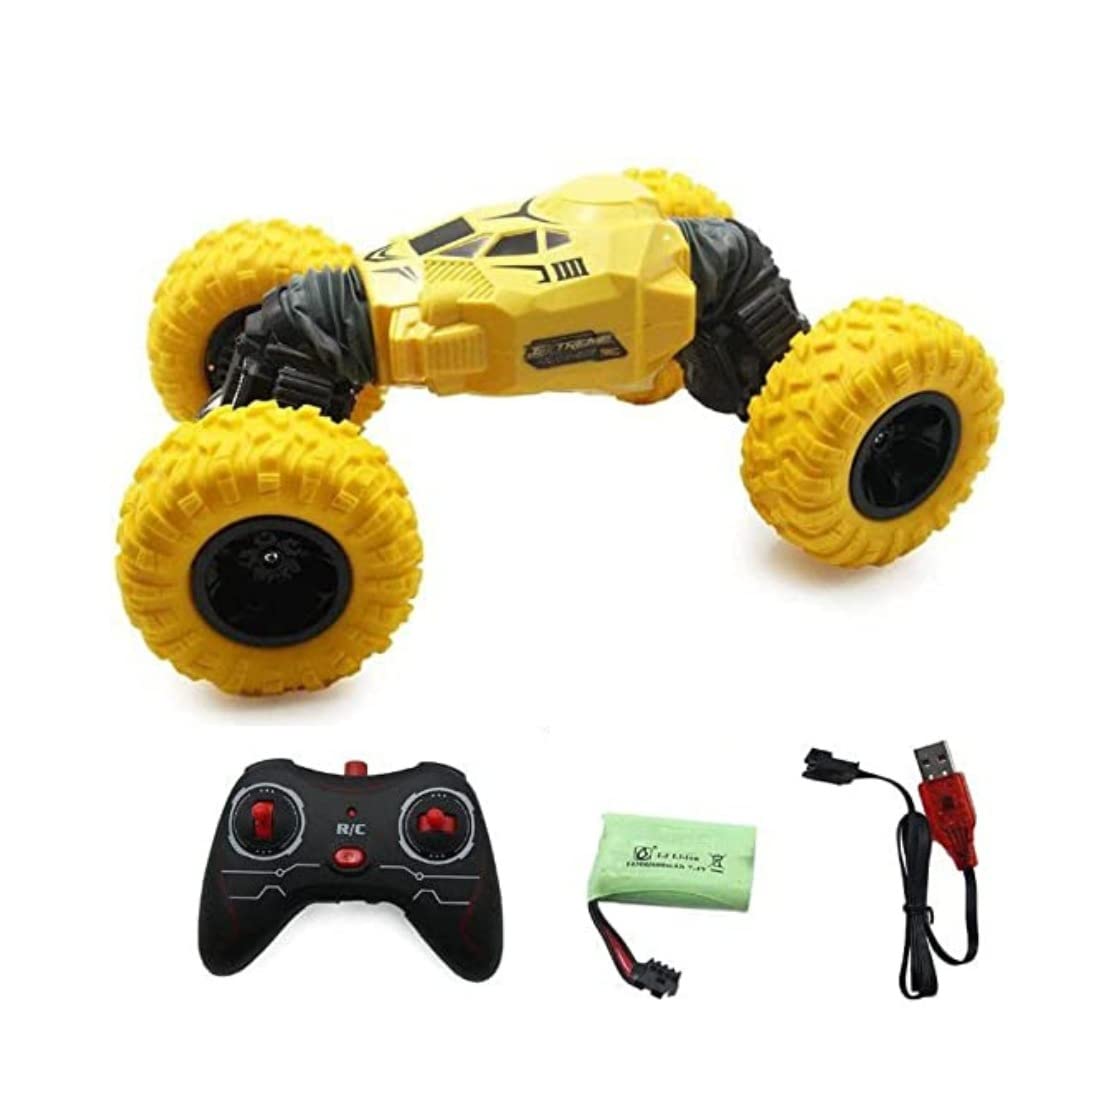 Big Size Double Sided Stunt Racing Moka 4-Wheel Drive Off Road Rock Crawler Remote Control Monster Car with 2.4 GHz for Kids, Multicolor